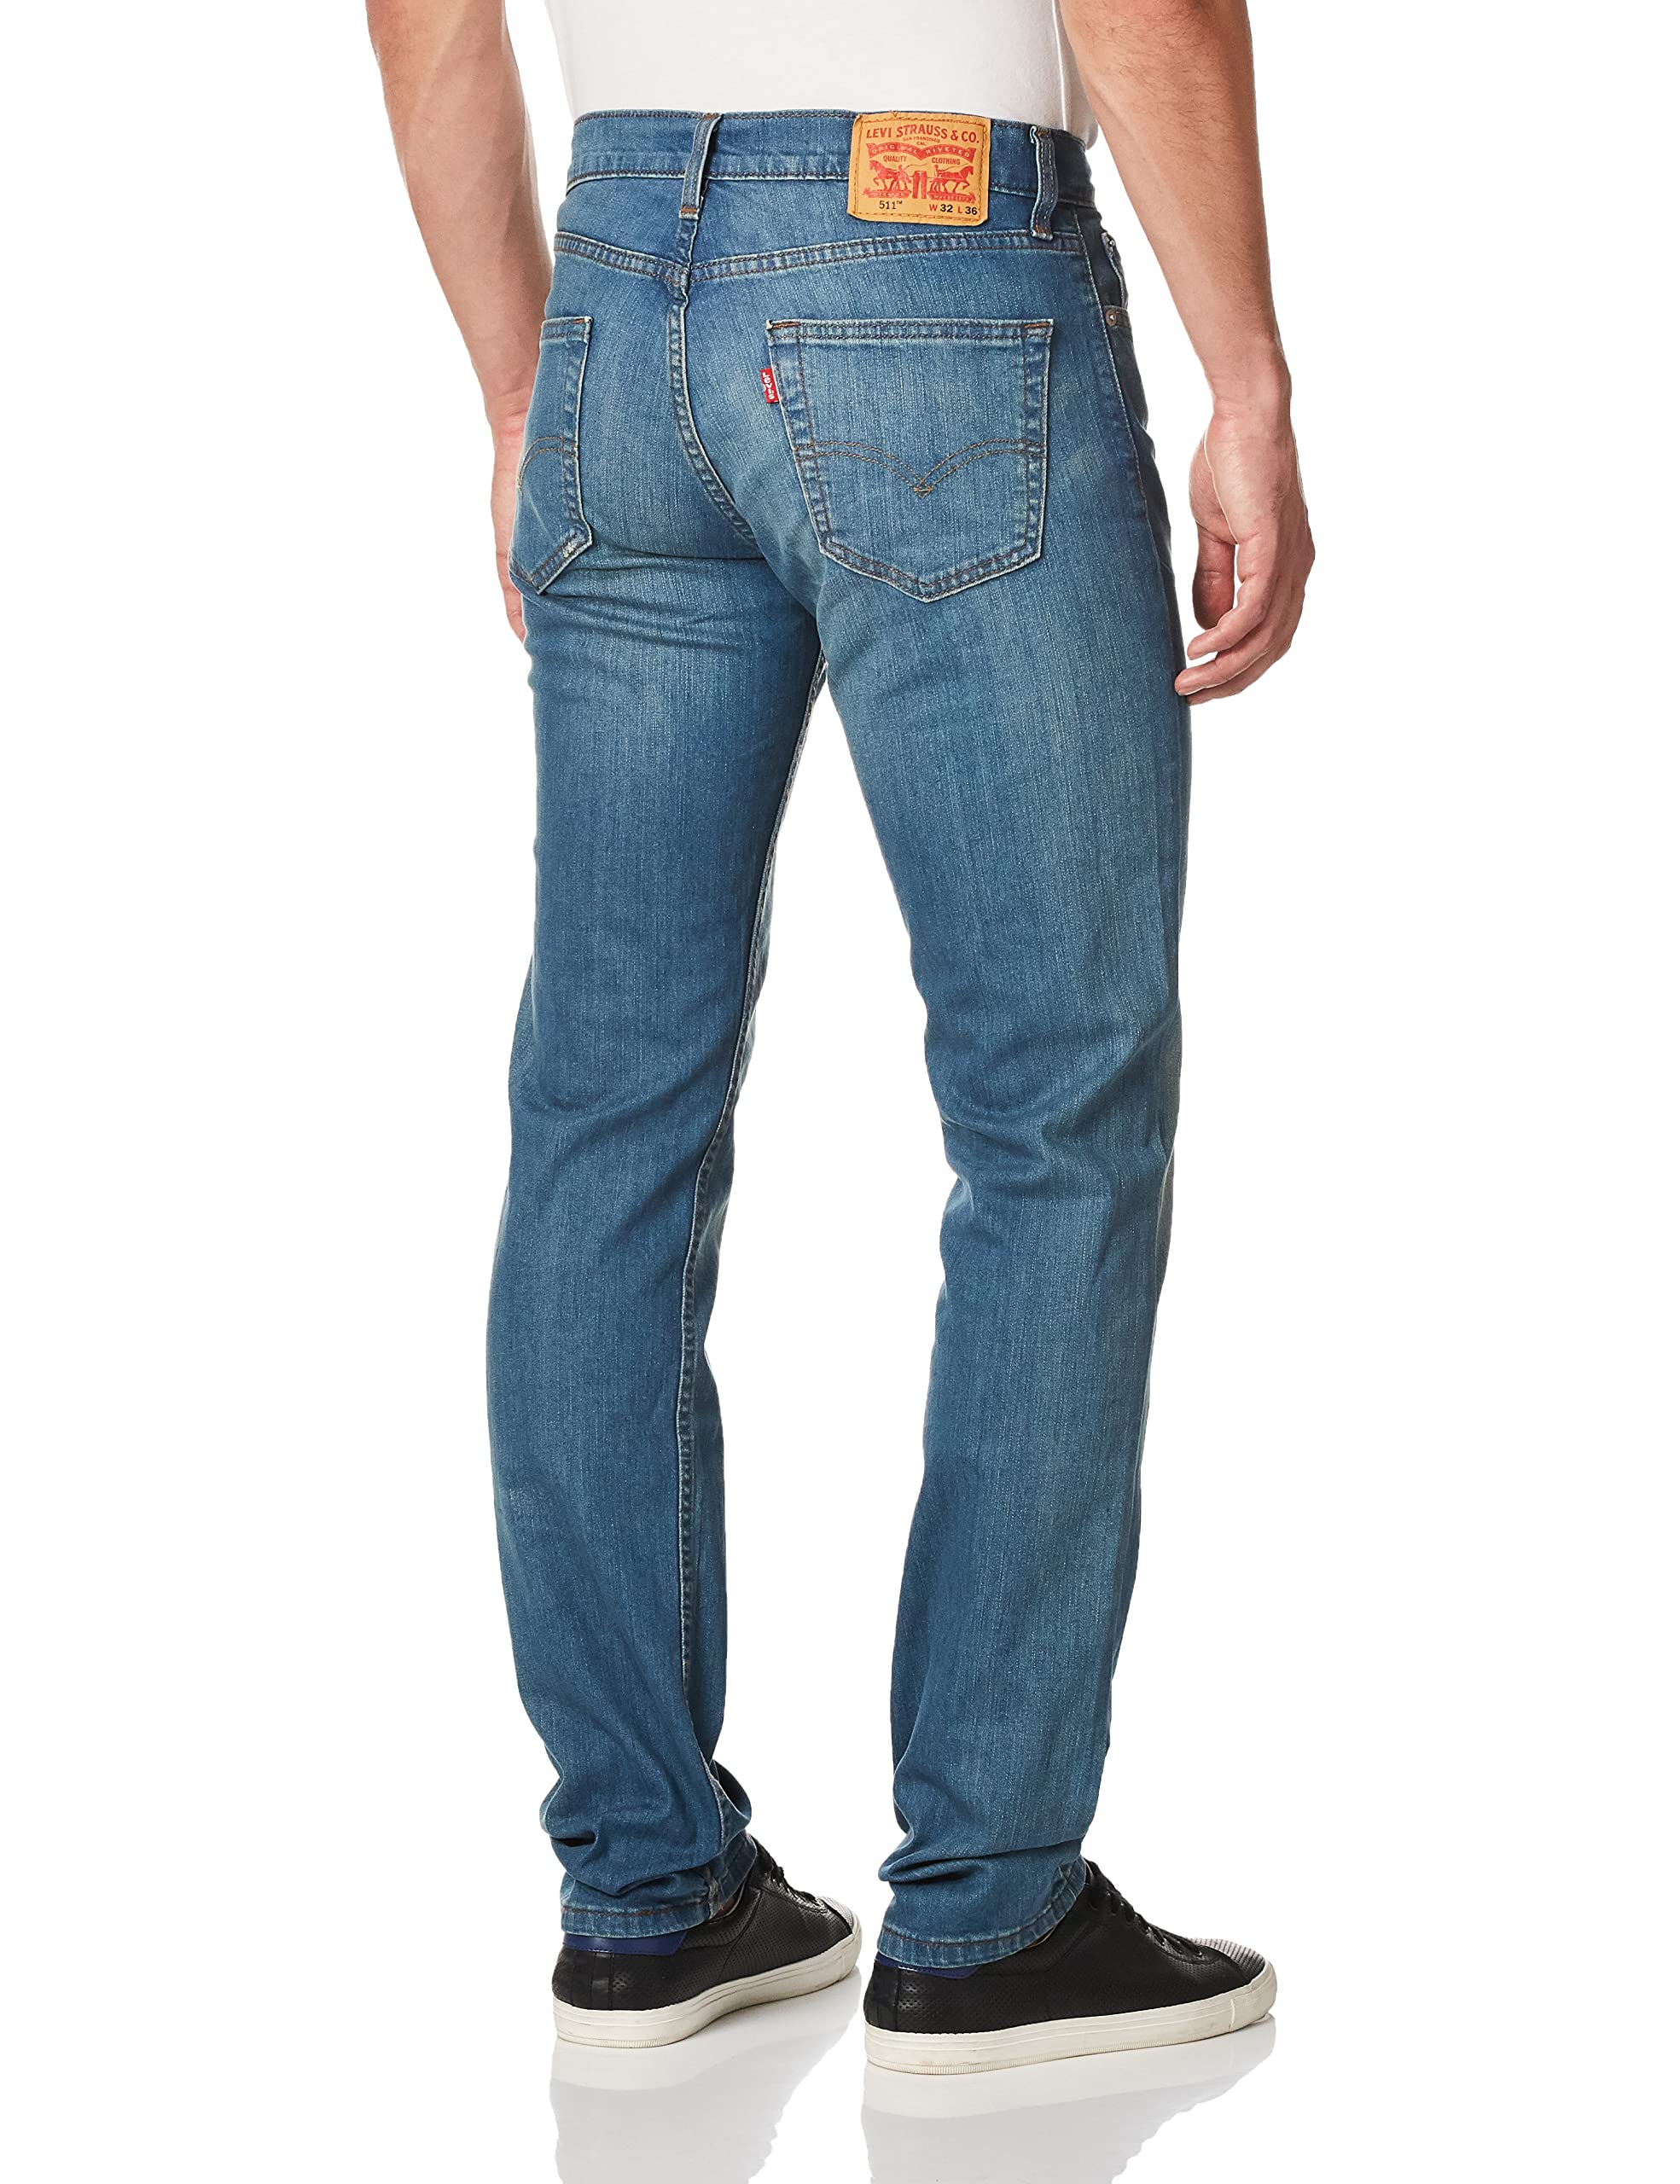 Levi's Men's 511 Slim Fit Jeans (Also Available in Big & Tall)